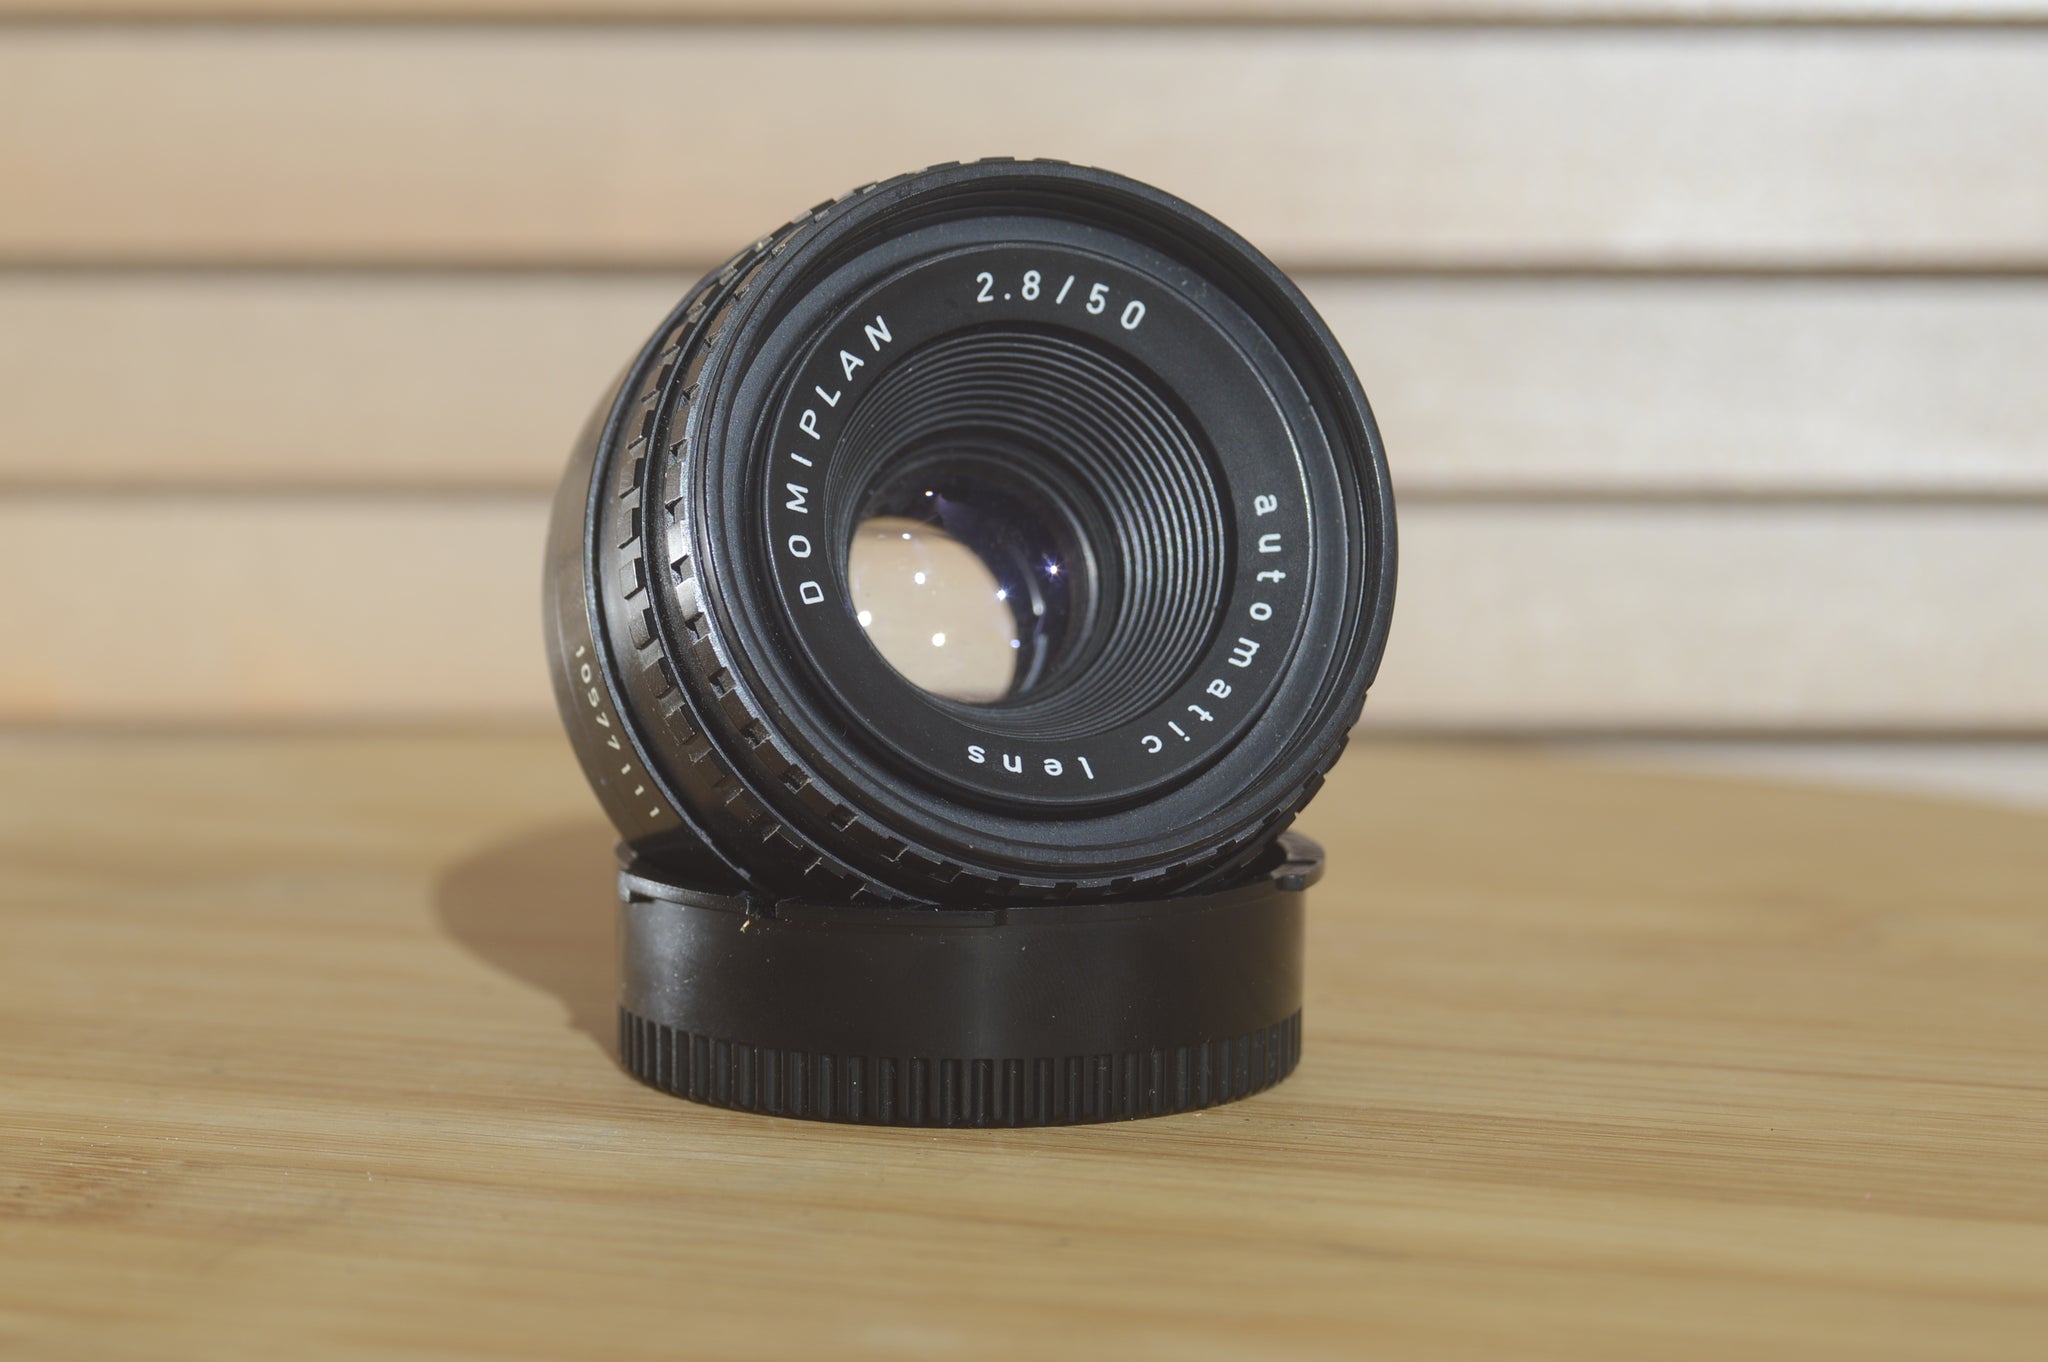 Domiplan Automatic M42 50mm f2.8 lens. Perfect addition to your M42 set up. - RewindCameras quality vintage cameras, fully tested and serviced